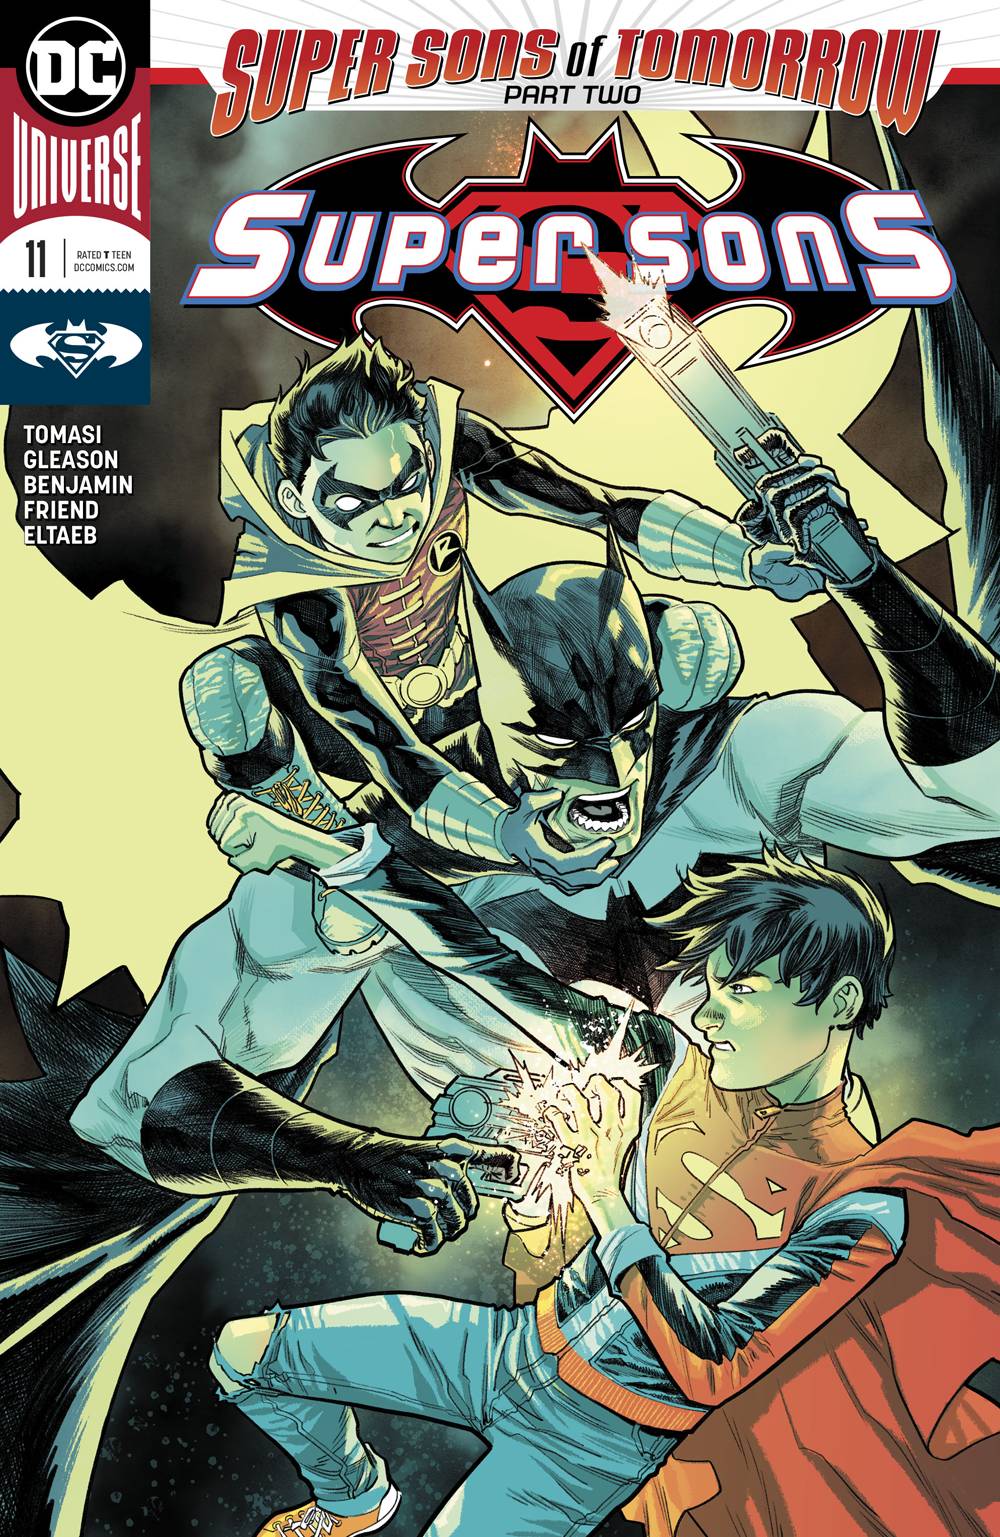 Super Sons #11 (Sons of Tomorrow) (2017)